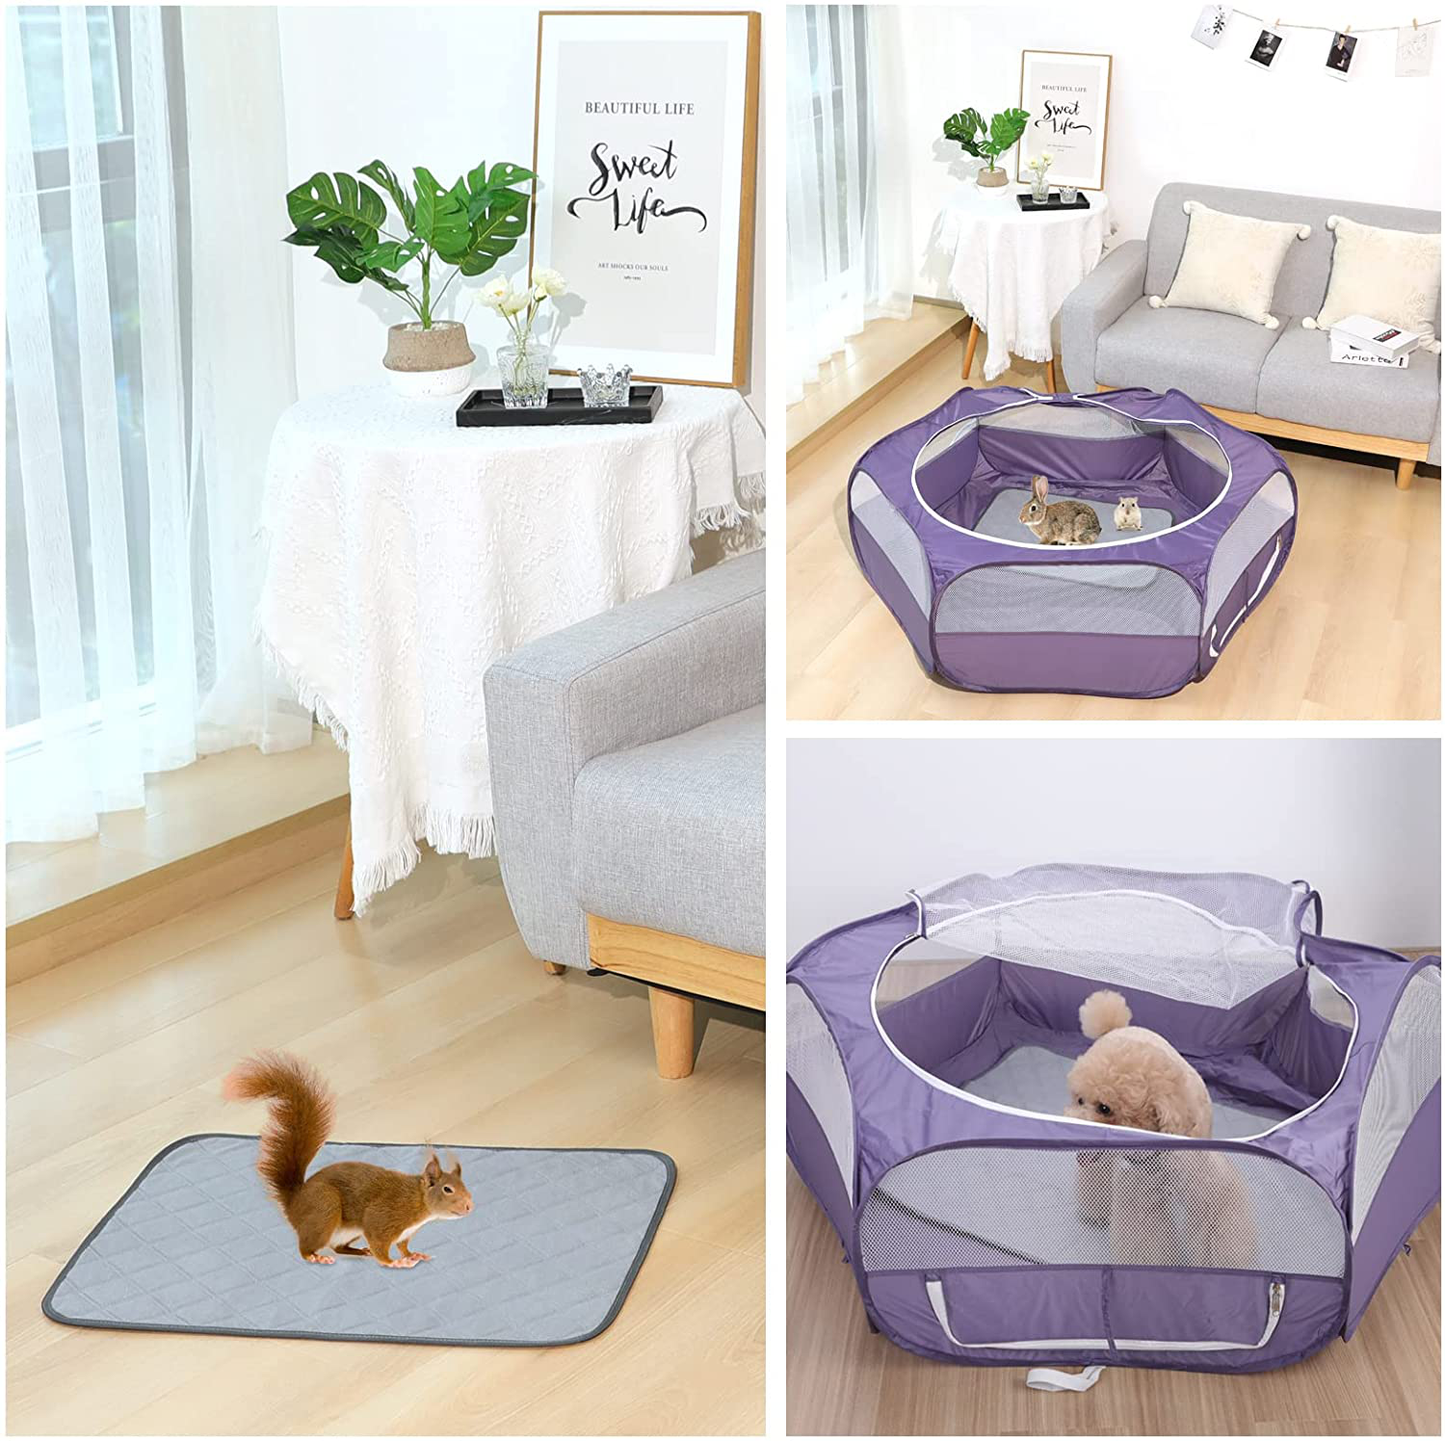 Vavopaw Guinea Pig Fleece Cage Liners, Pet Pee Pad, Washable Reusable Anti-Slip Leakproof Guinea Pig Pee Bedding Pad for Small Animals Rabbit Chinchilla Hamster